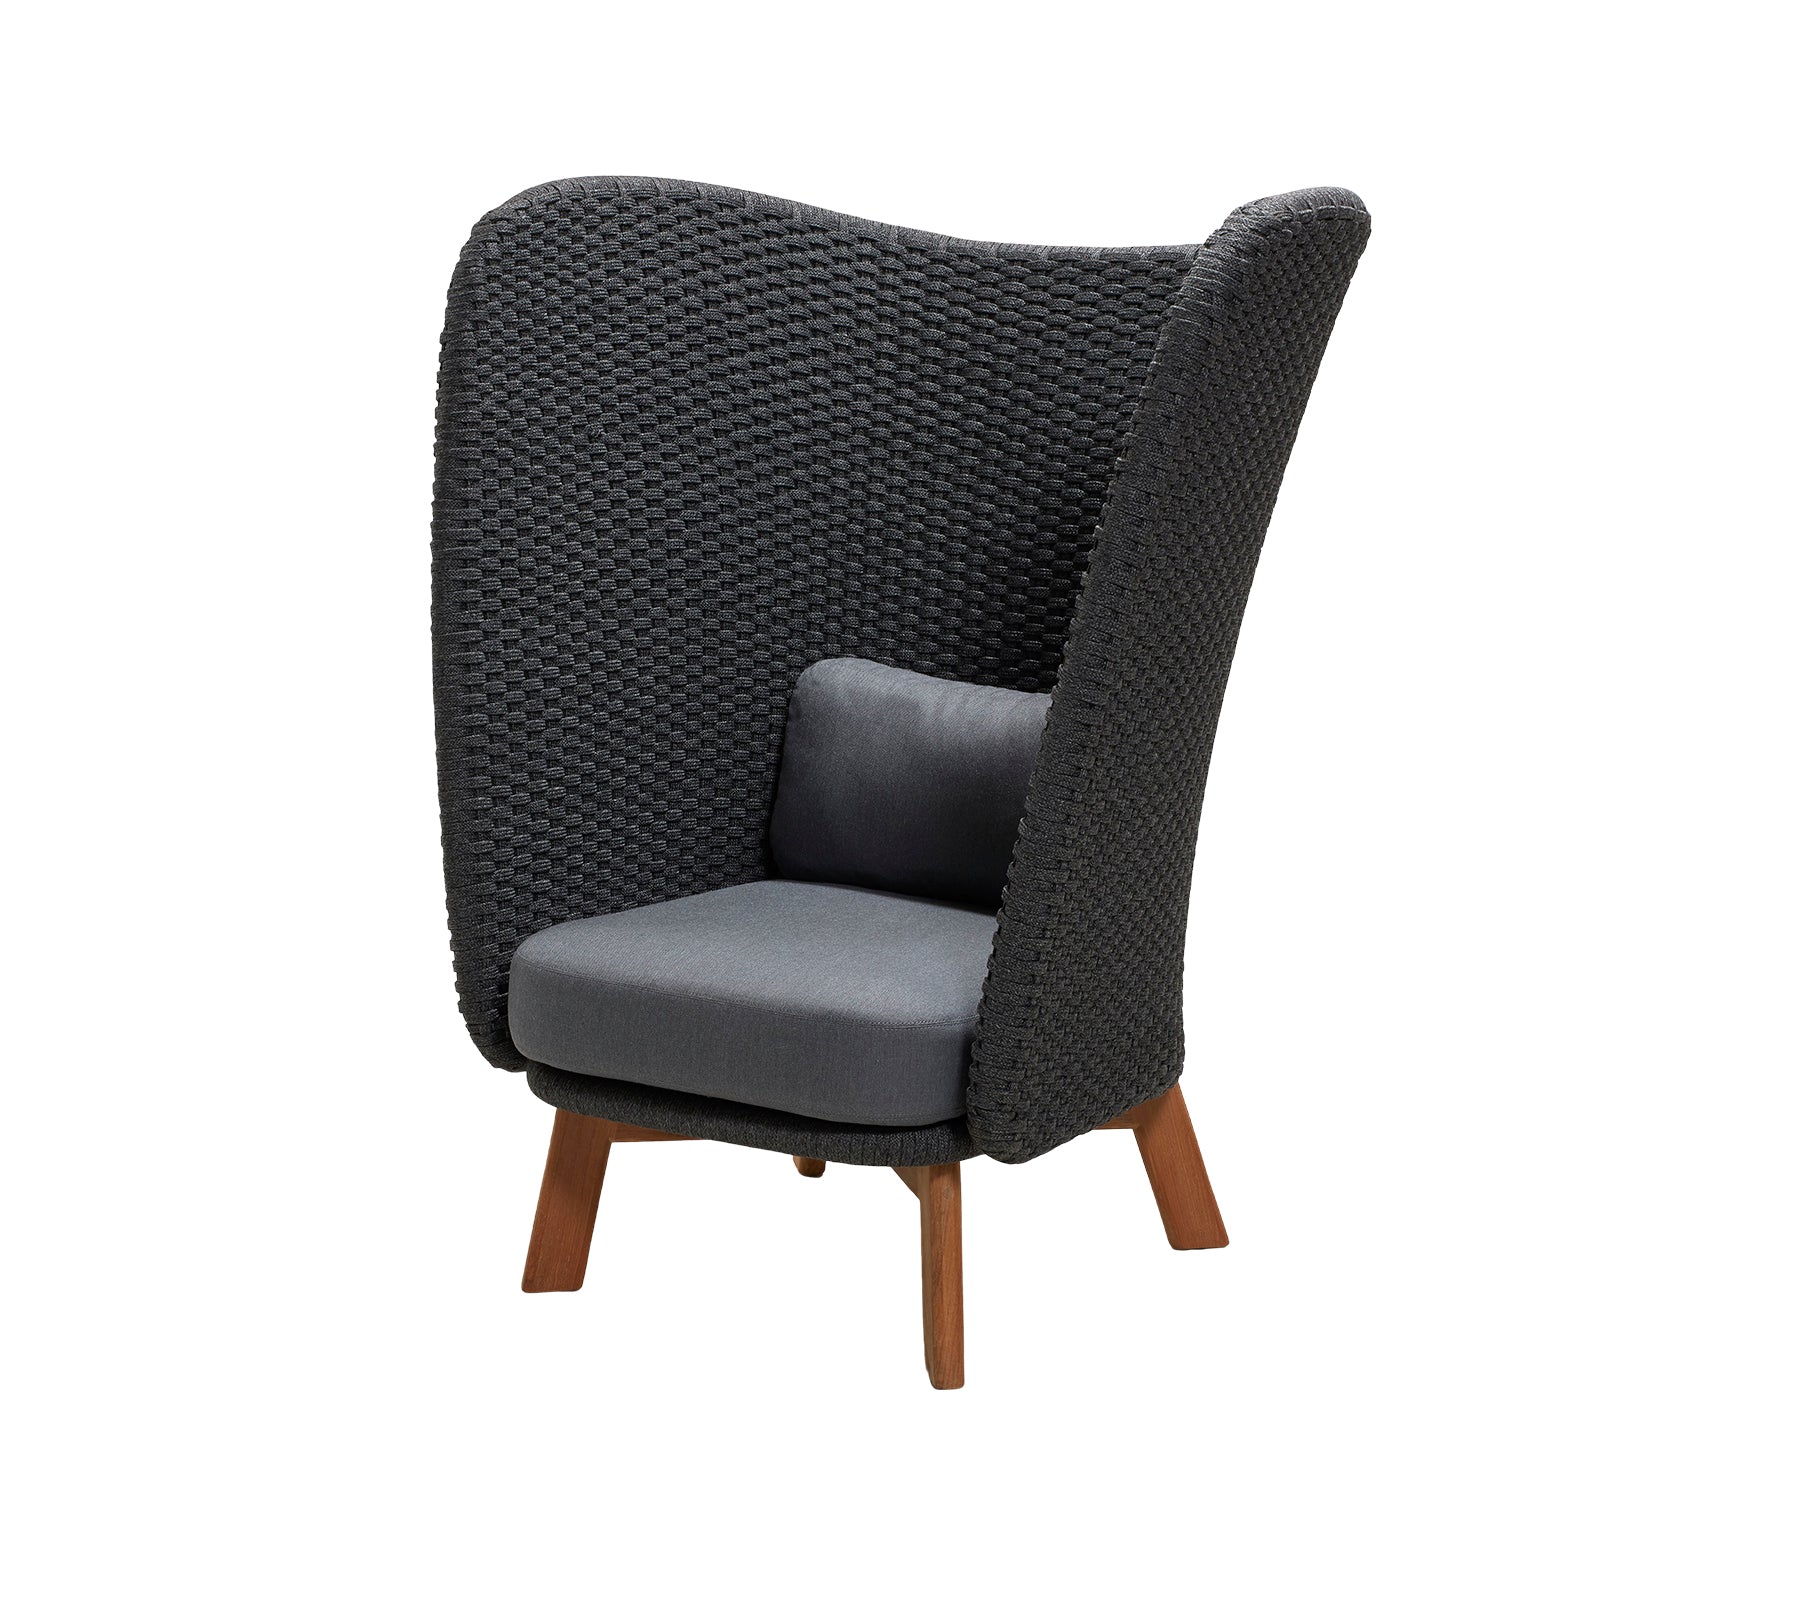 Cane-line Peacock Wing Highback Chair 5460RODGT